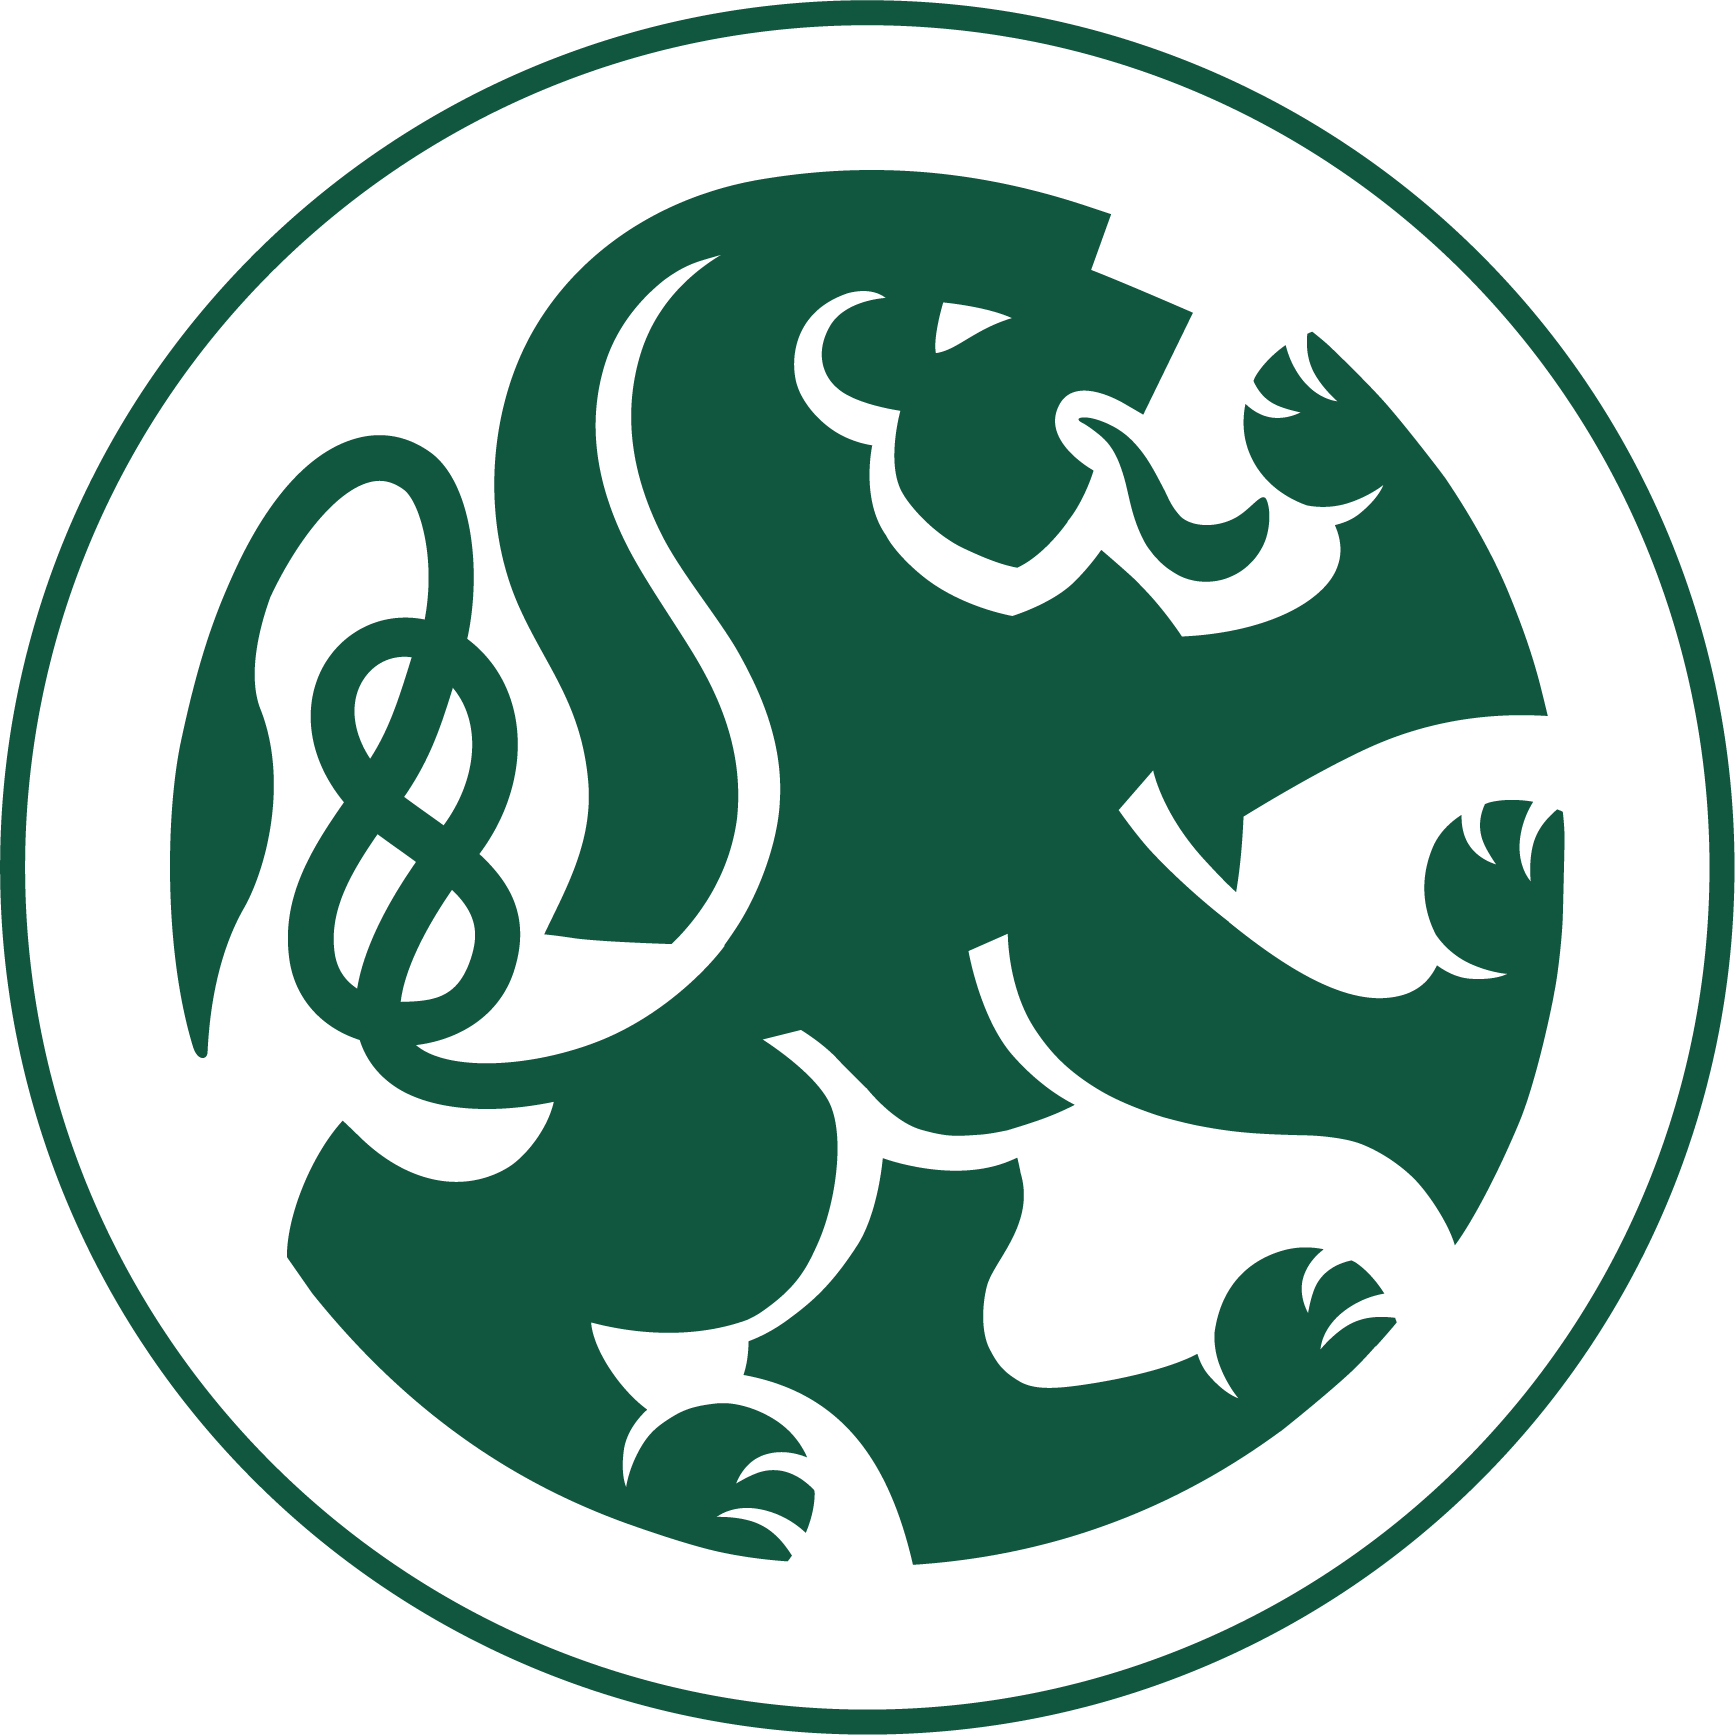 Logo of the PLUS in green